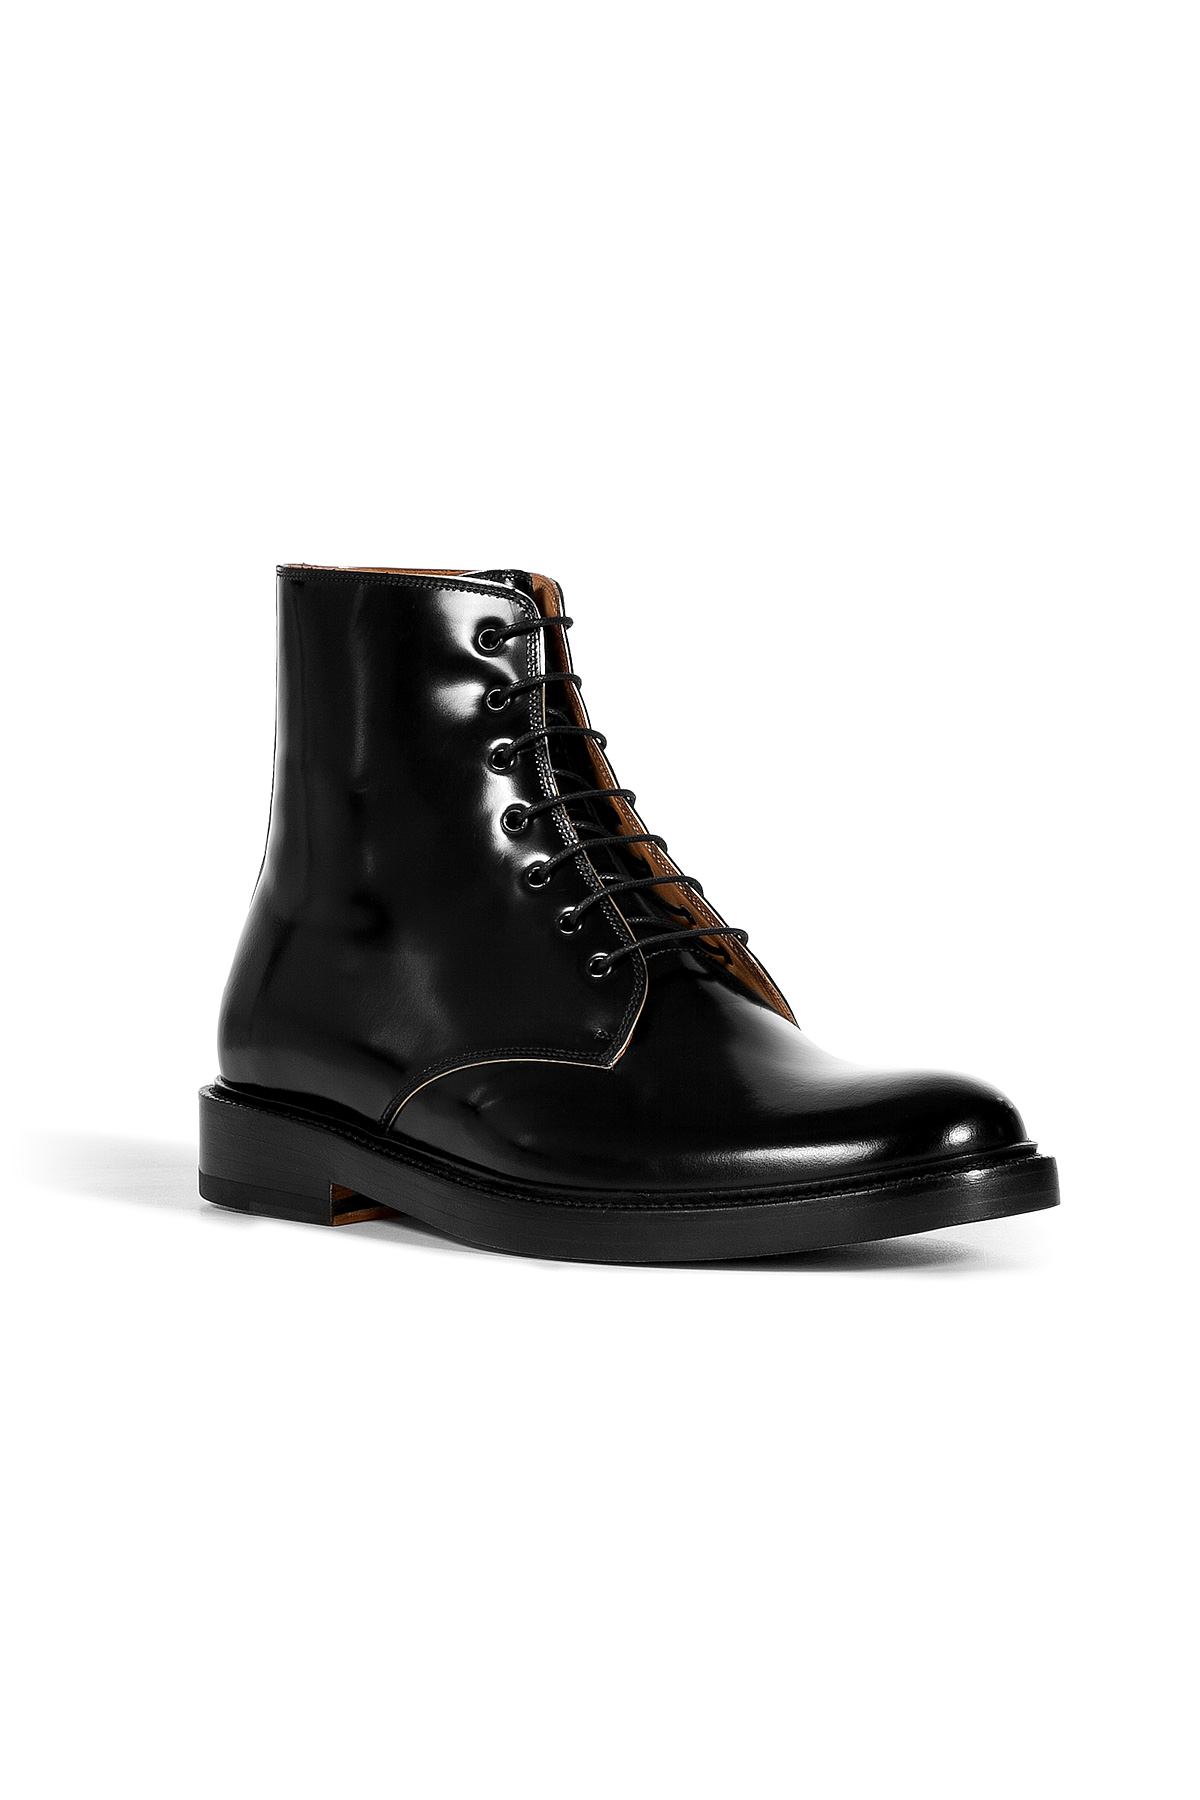 Marc Jacobs Black Glazed Leather Laceup Boots in Black for Men | Lyst